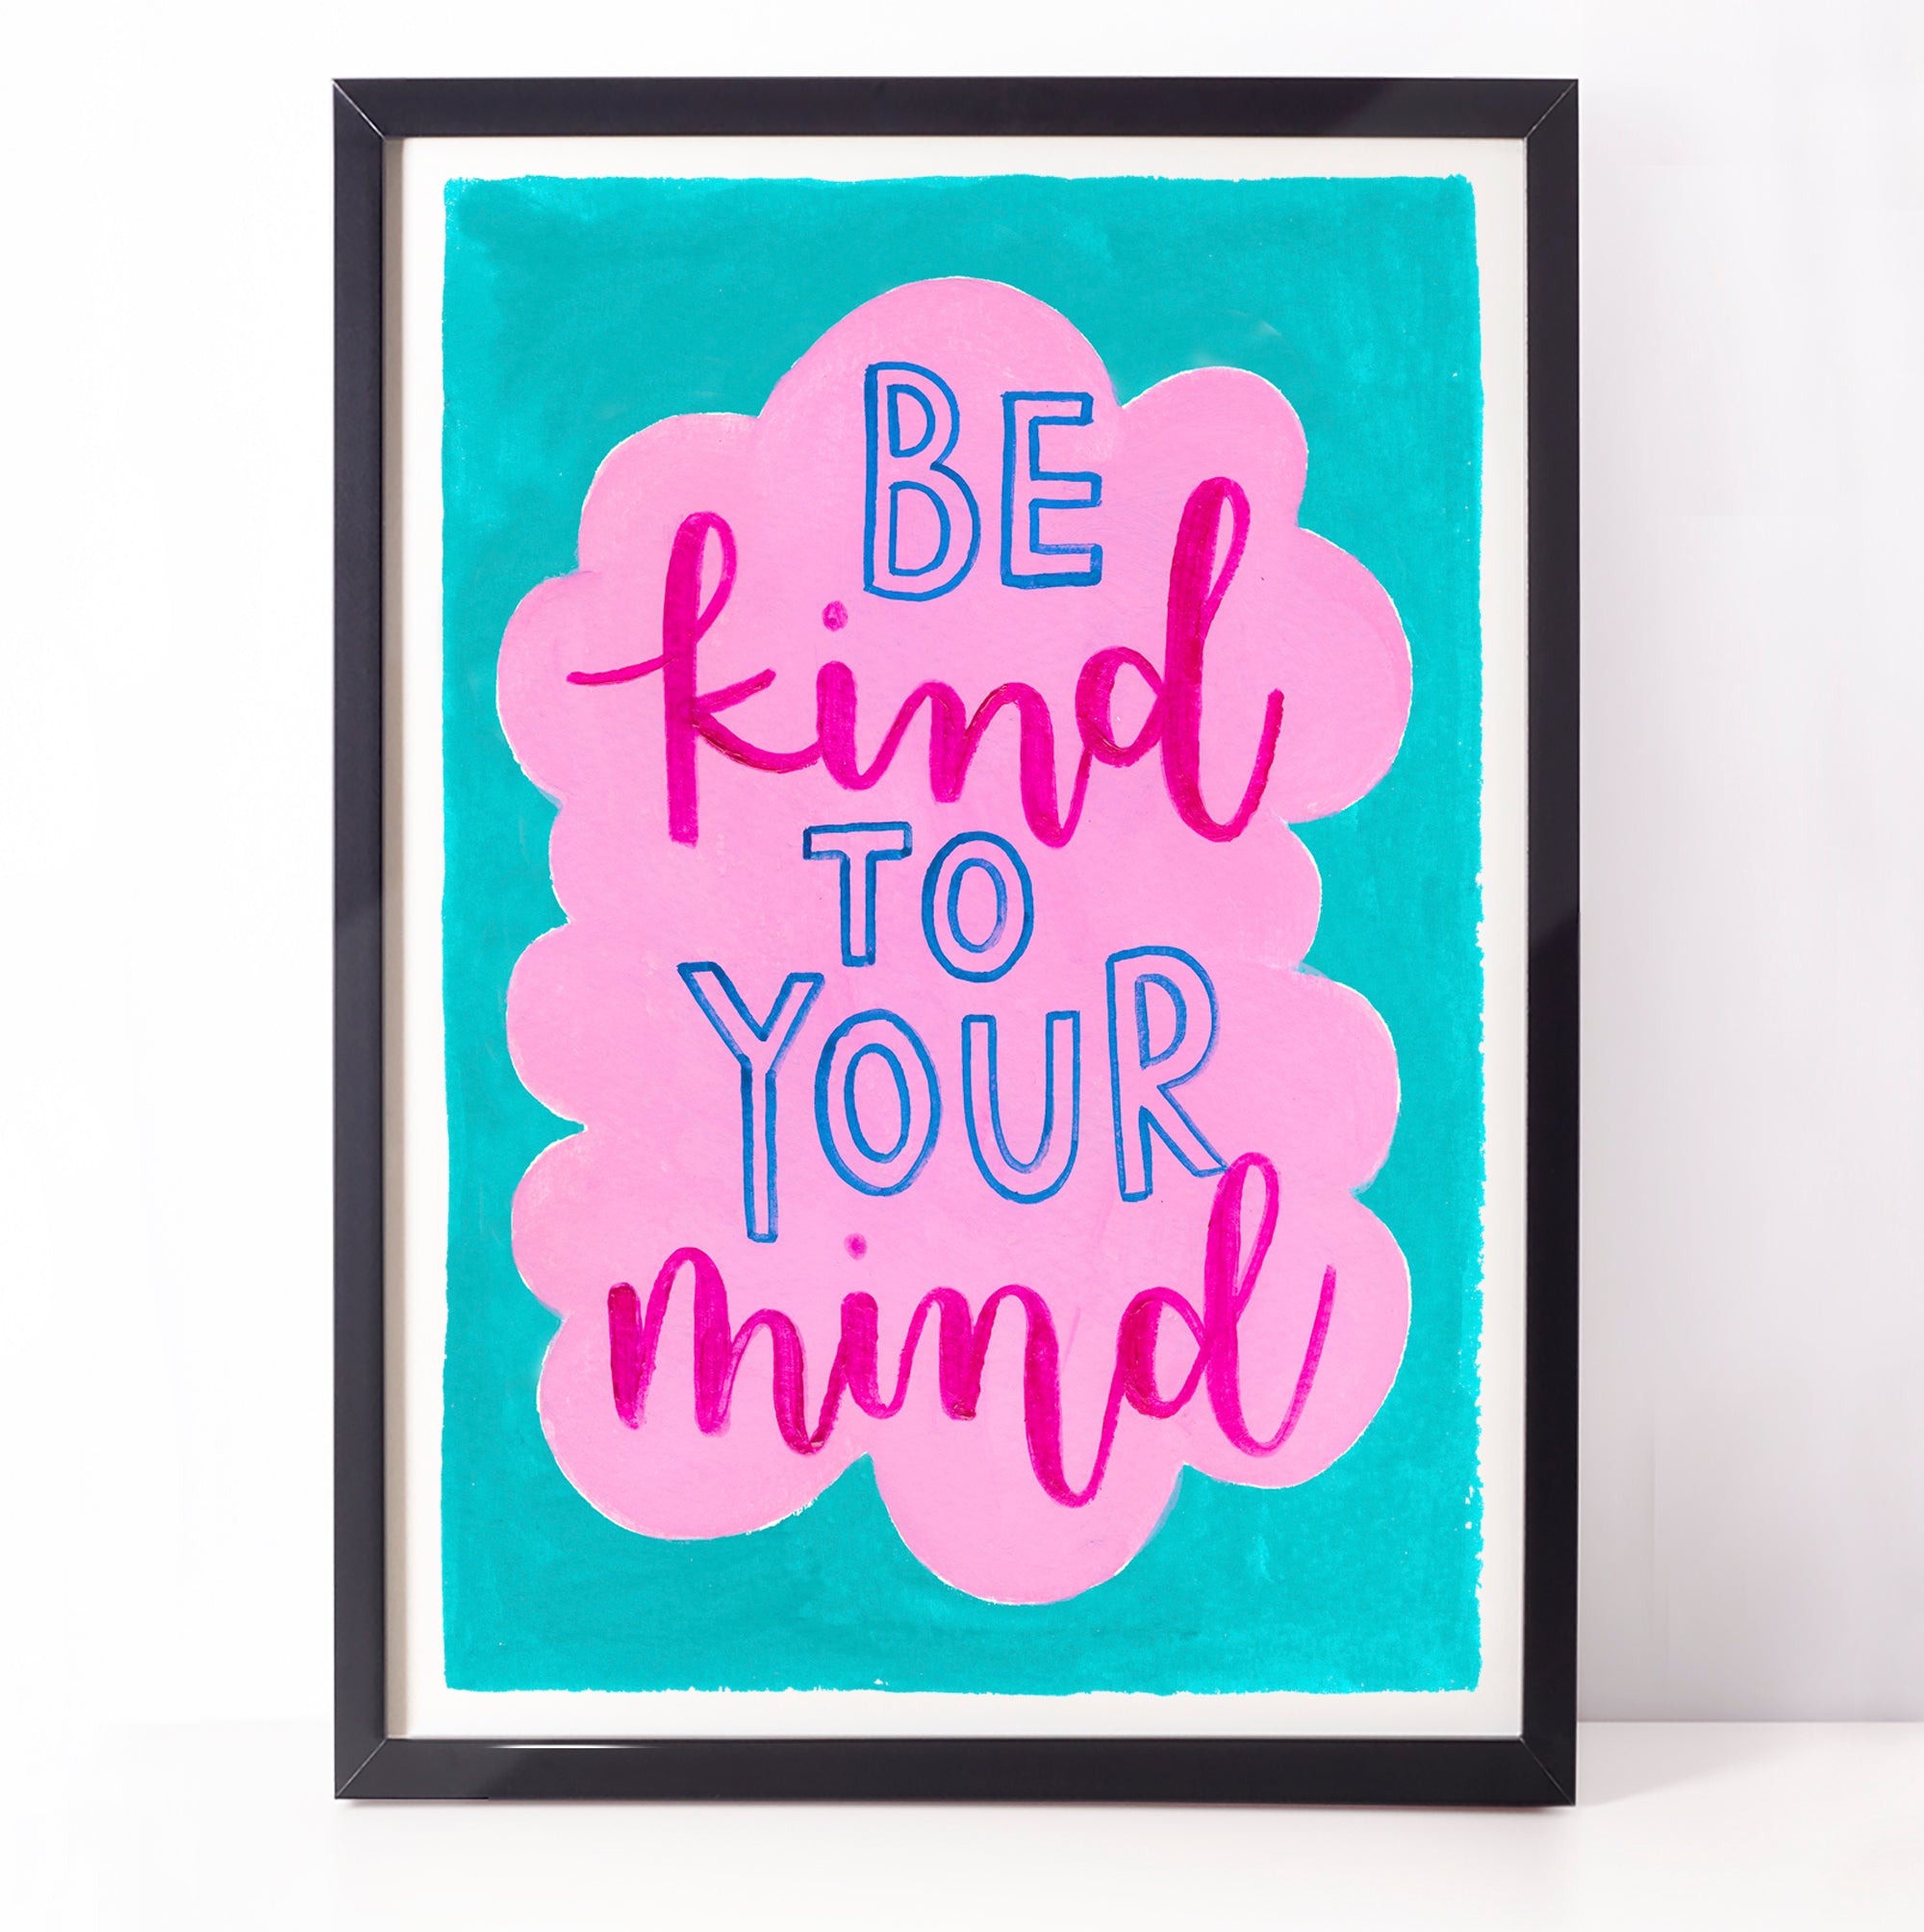 Colourful motivational print - Be kind to your mind